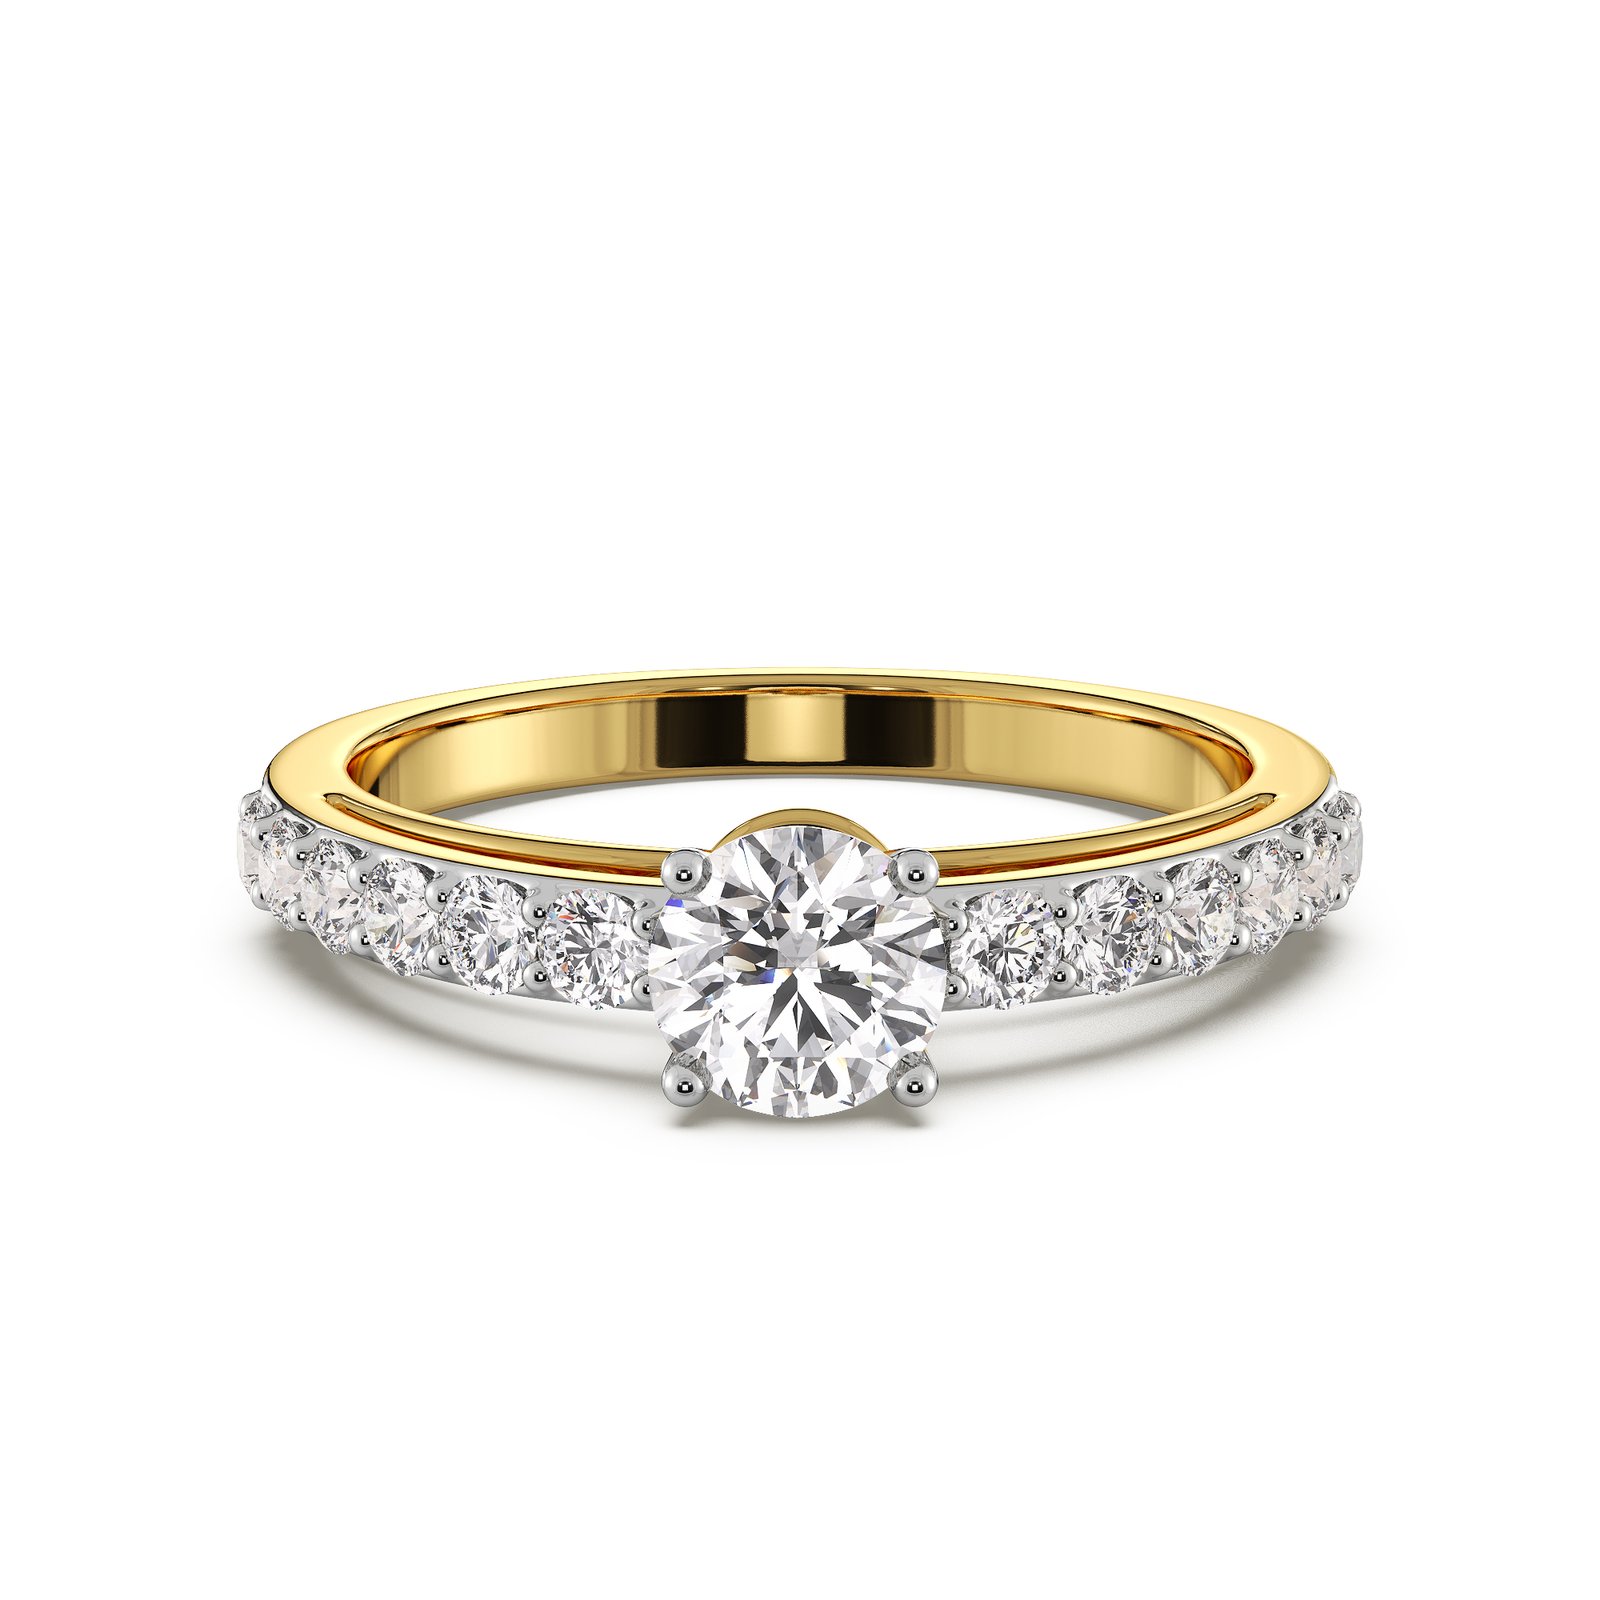 Buy Engagement Rings Online | Willwork – WILLWORK JEWELRY